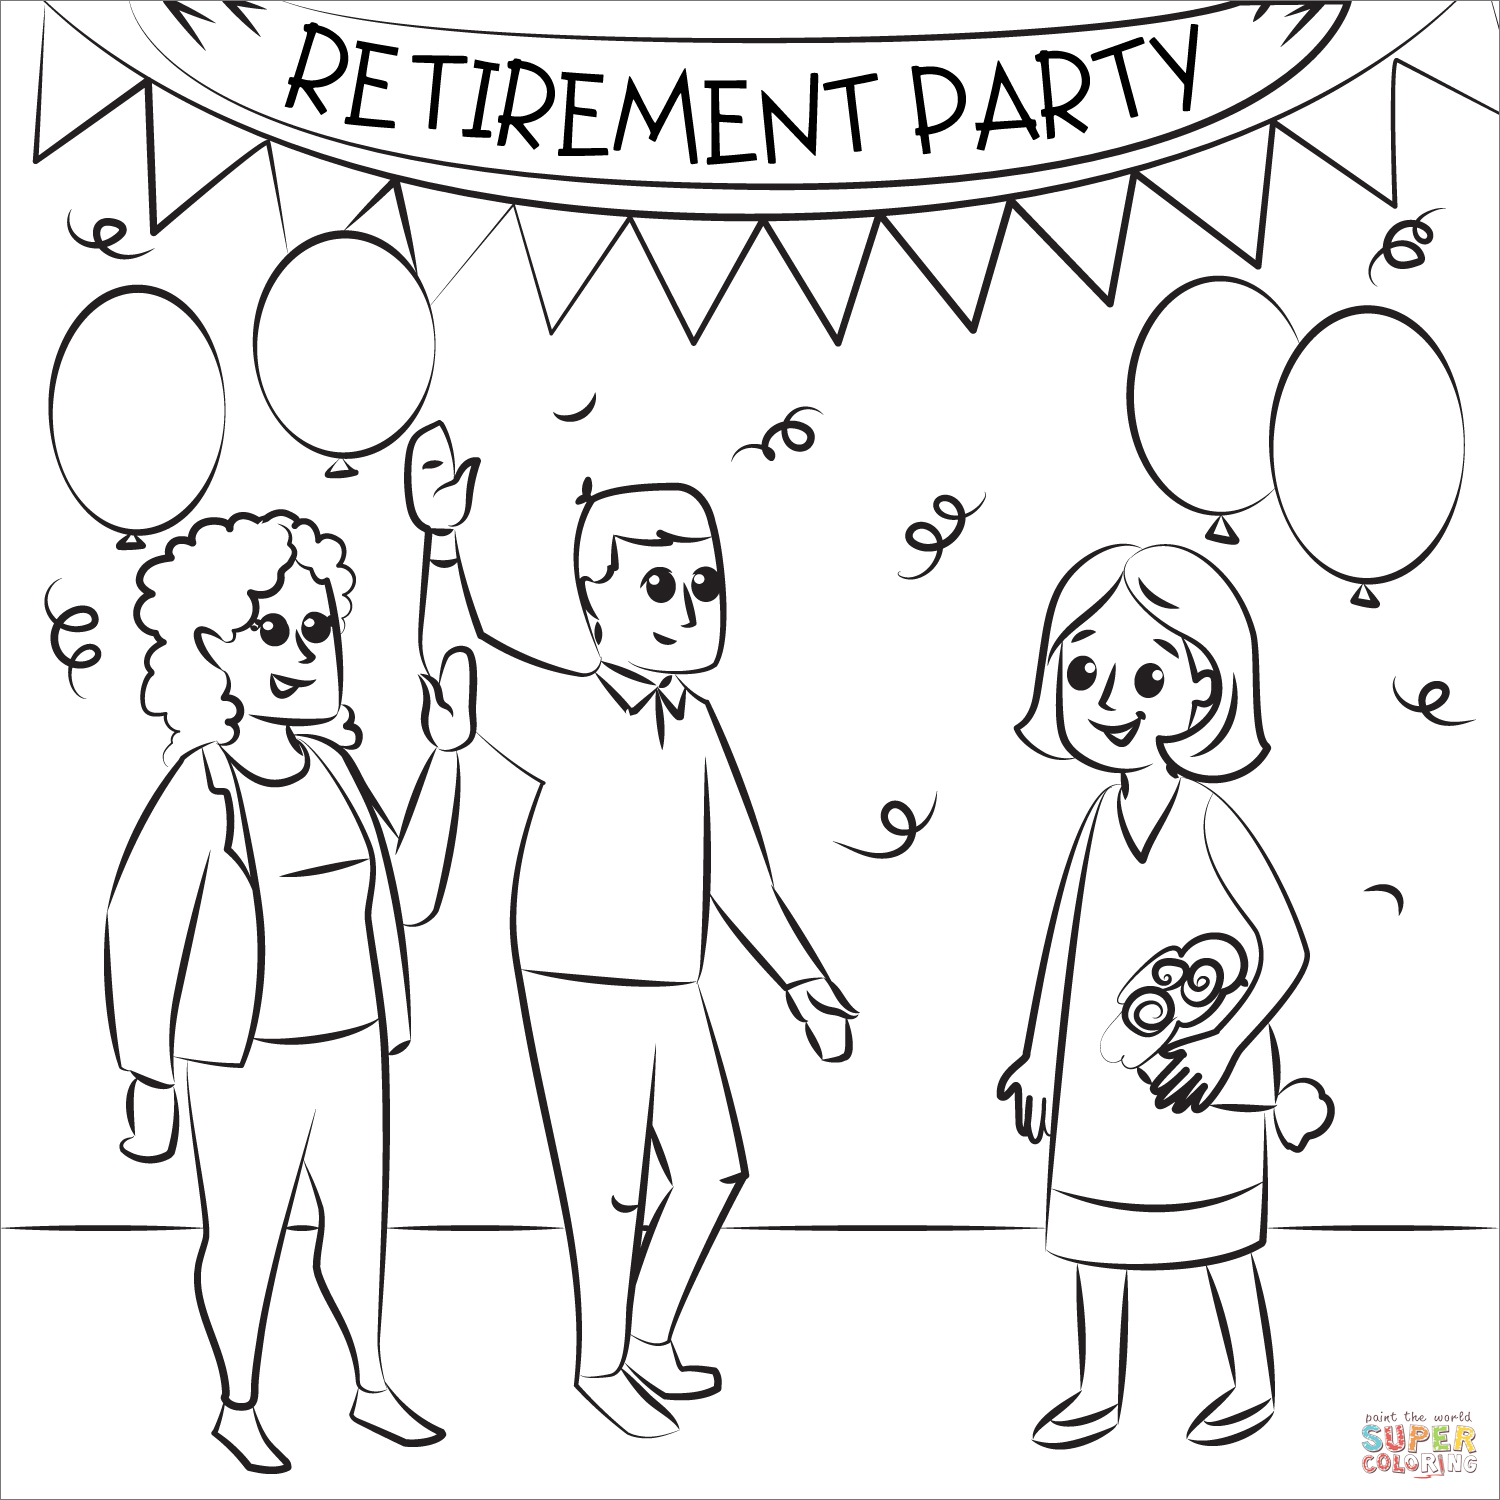 Retirement party coloring page free printable coloring pages